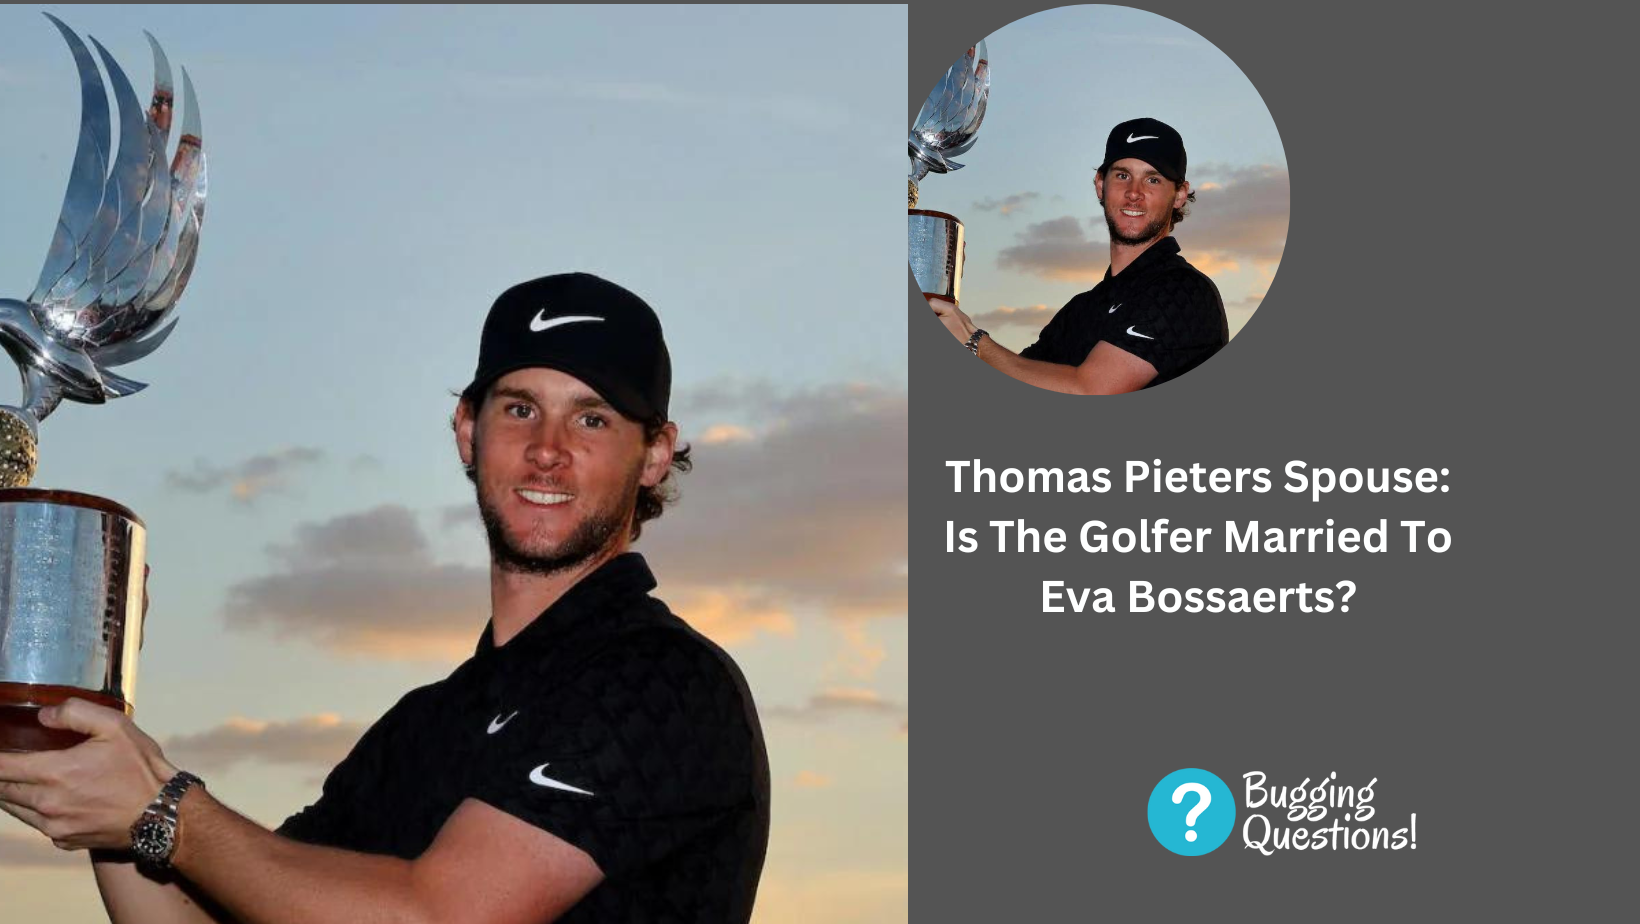 Thomas Pieters Spouse: Is The Golfer Married To Eva Bossaerts?